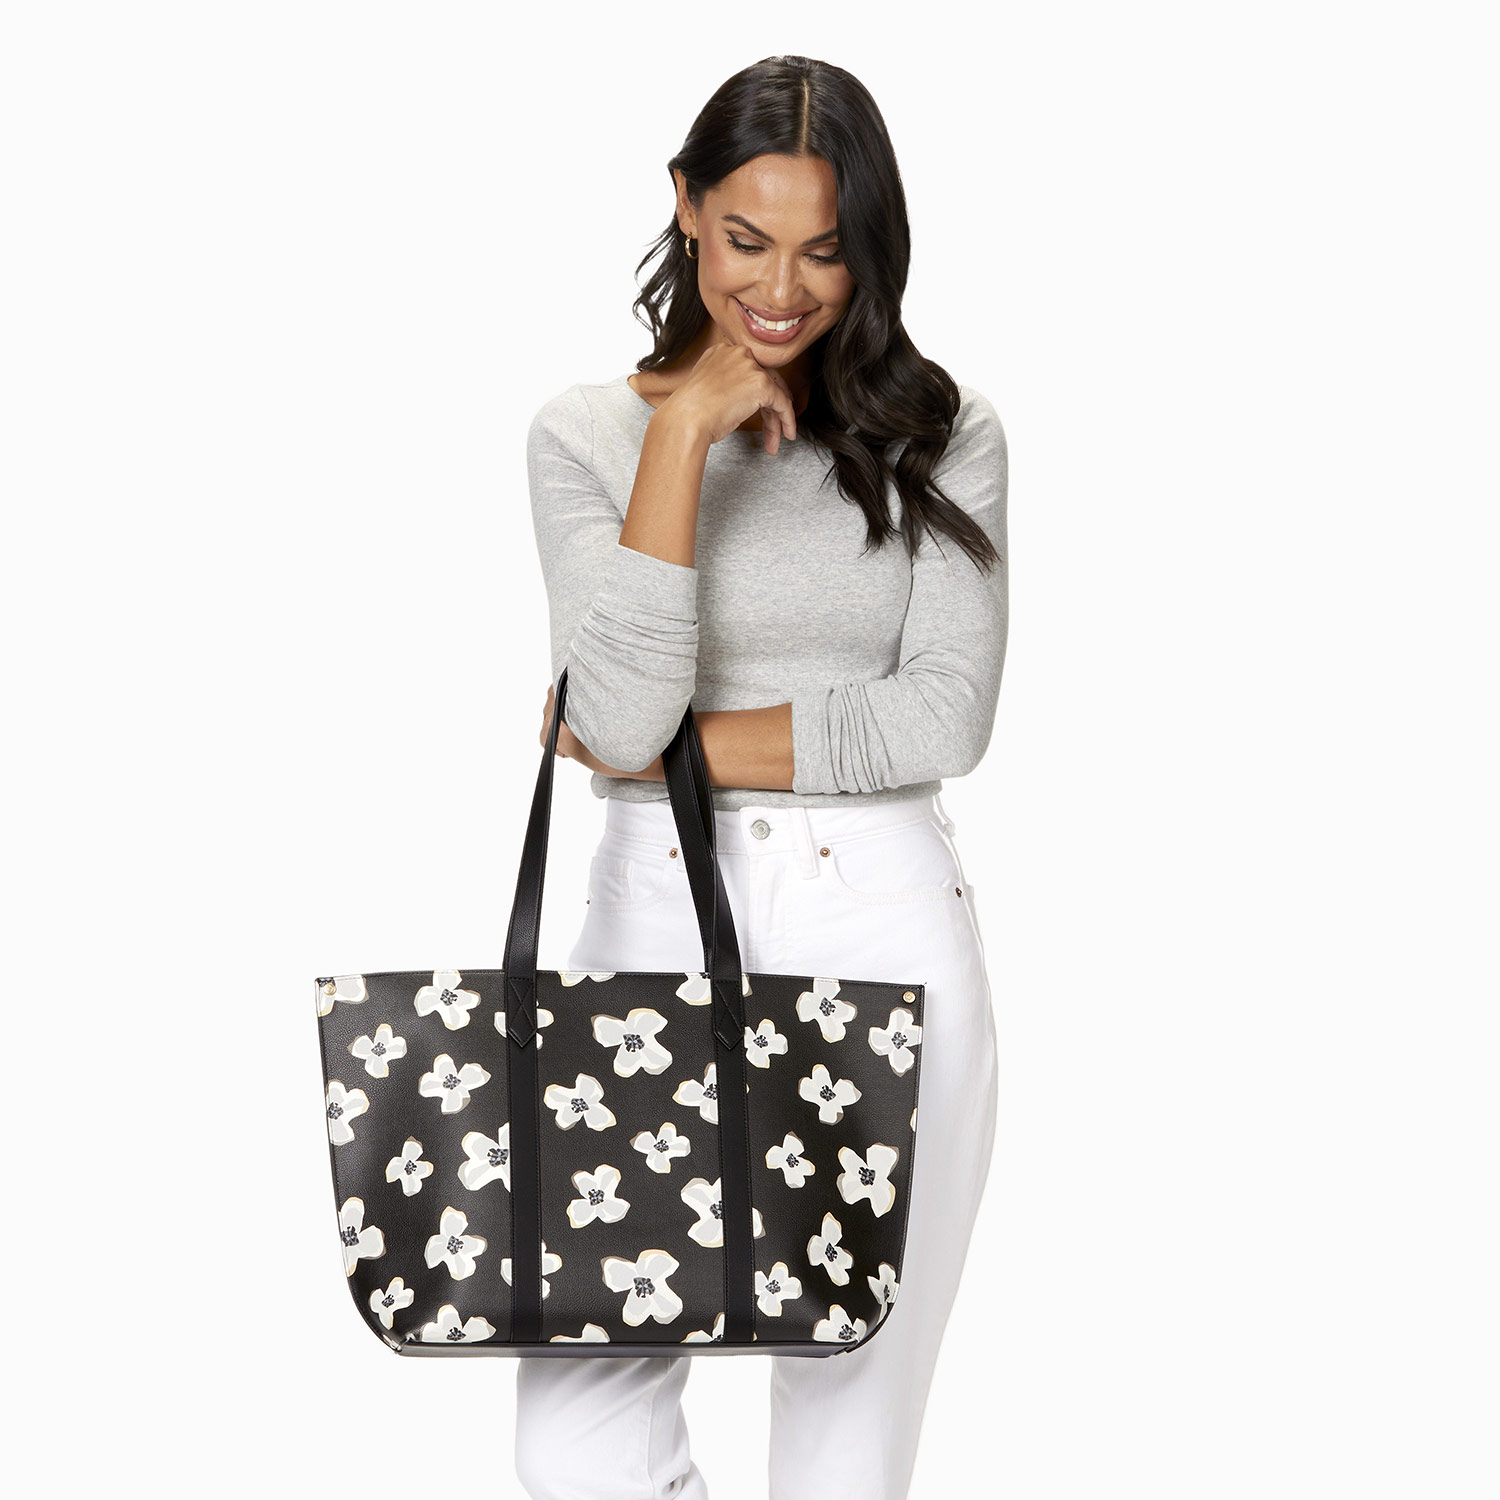 Caramel Smooth Pebble - All About The Benjamins - Thirty-One Gifts -  Affordable Purses, Totes & Bags